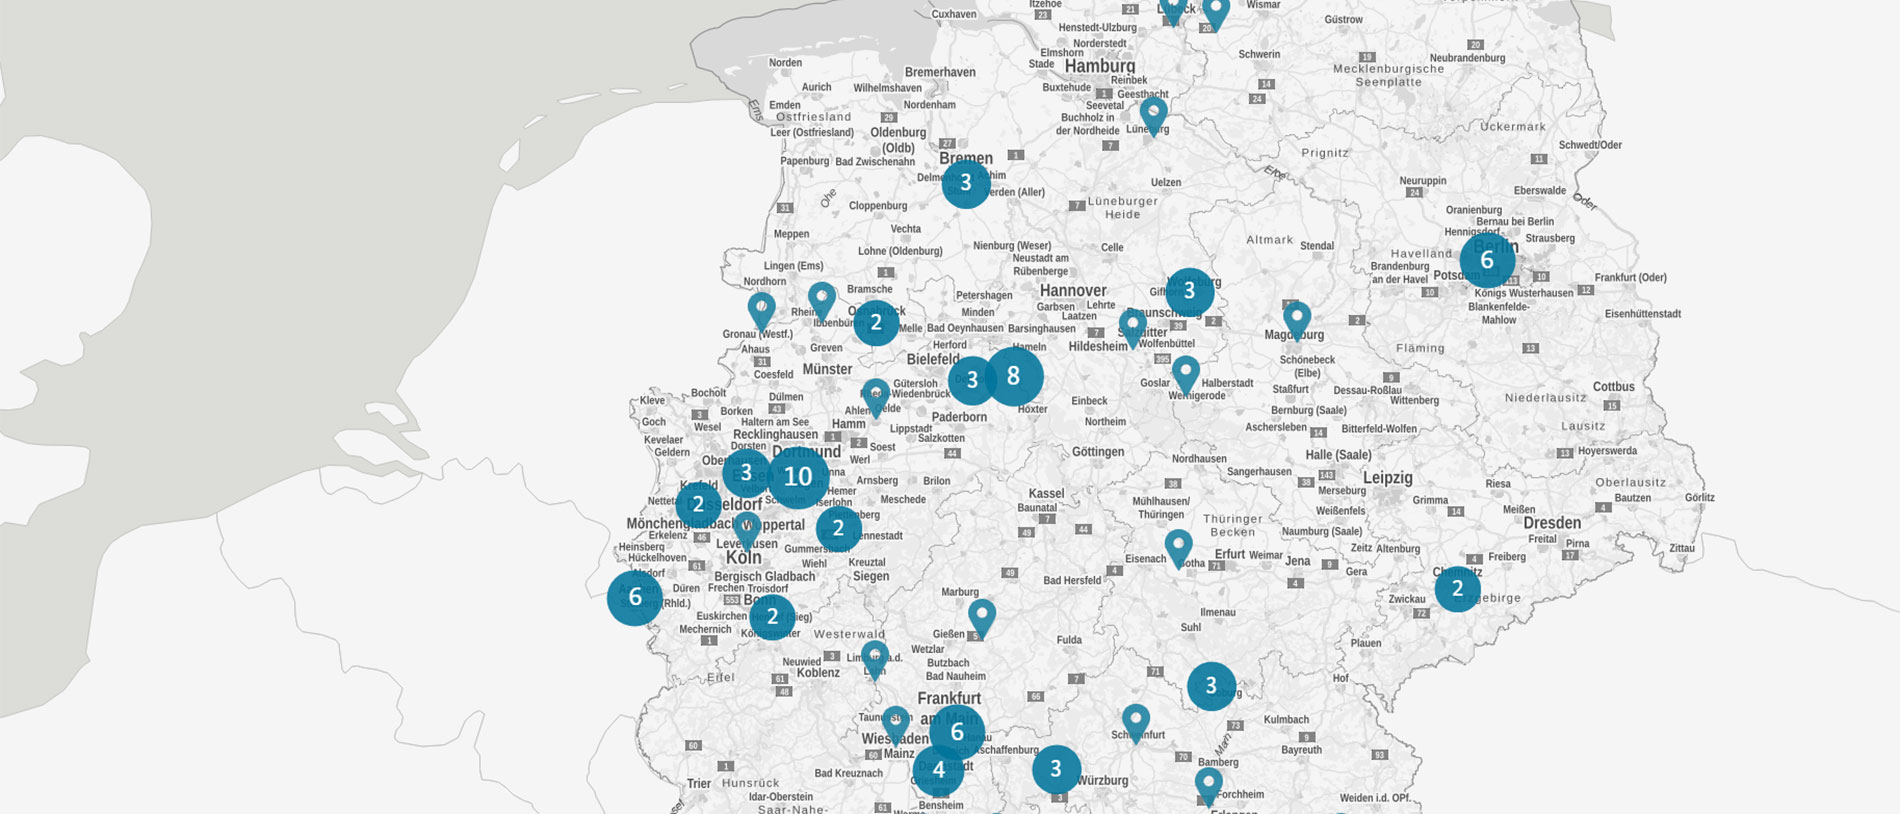 Map of Industrie 4.0 use cases